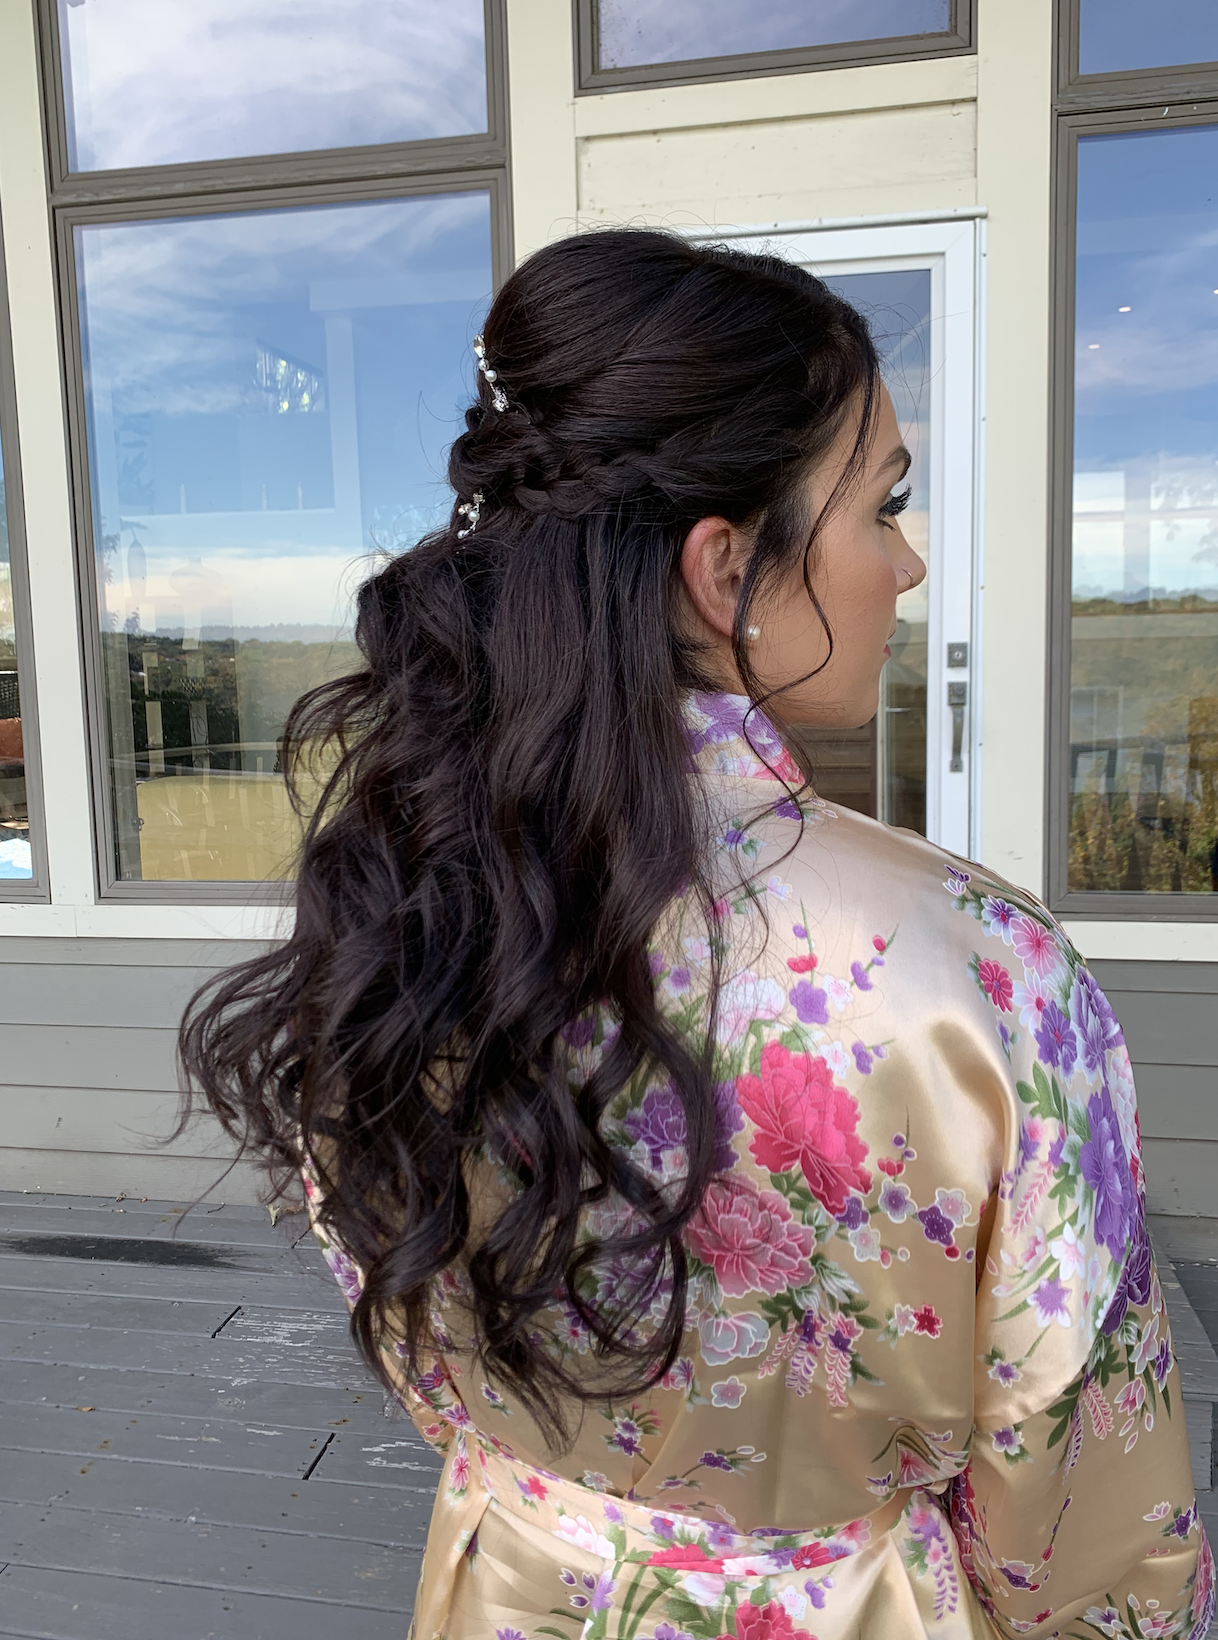 20 Asian Wedding Hairstyles That Will Make You Go Awe!